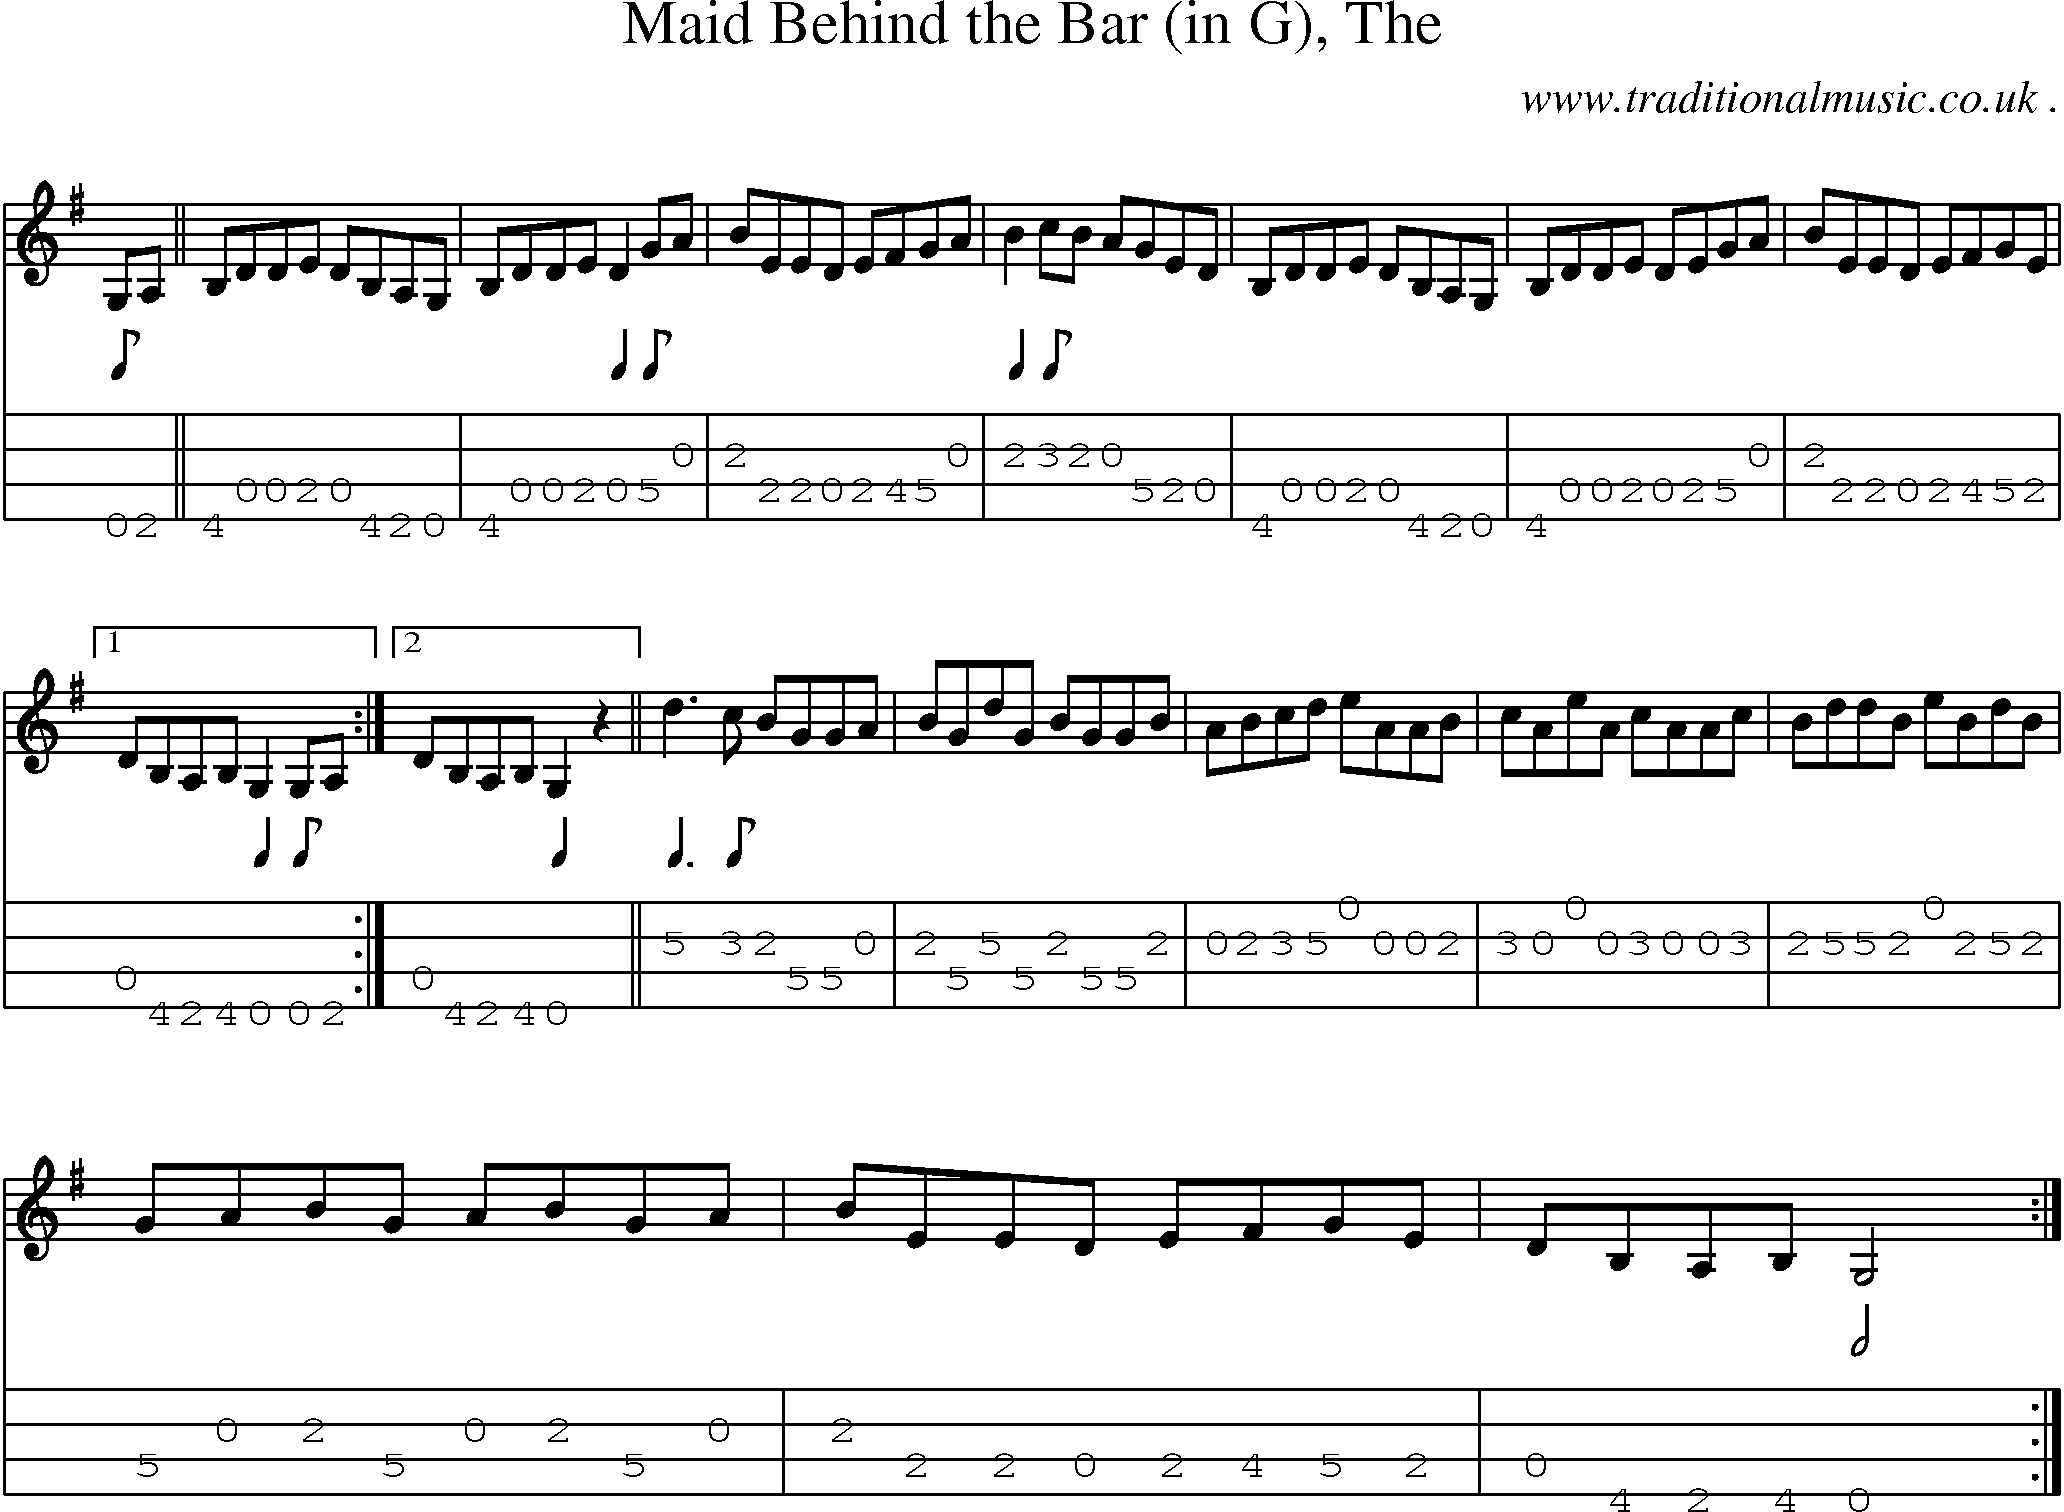 Sheet-music  score, Chords and Mandolin Tabs for Maid Behind The Bar In G The